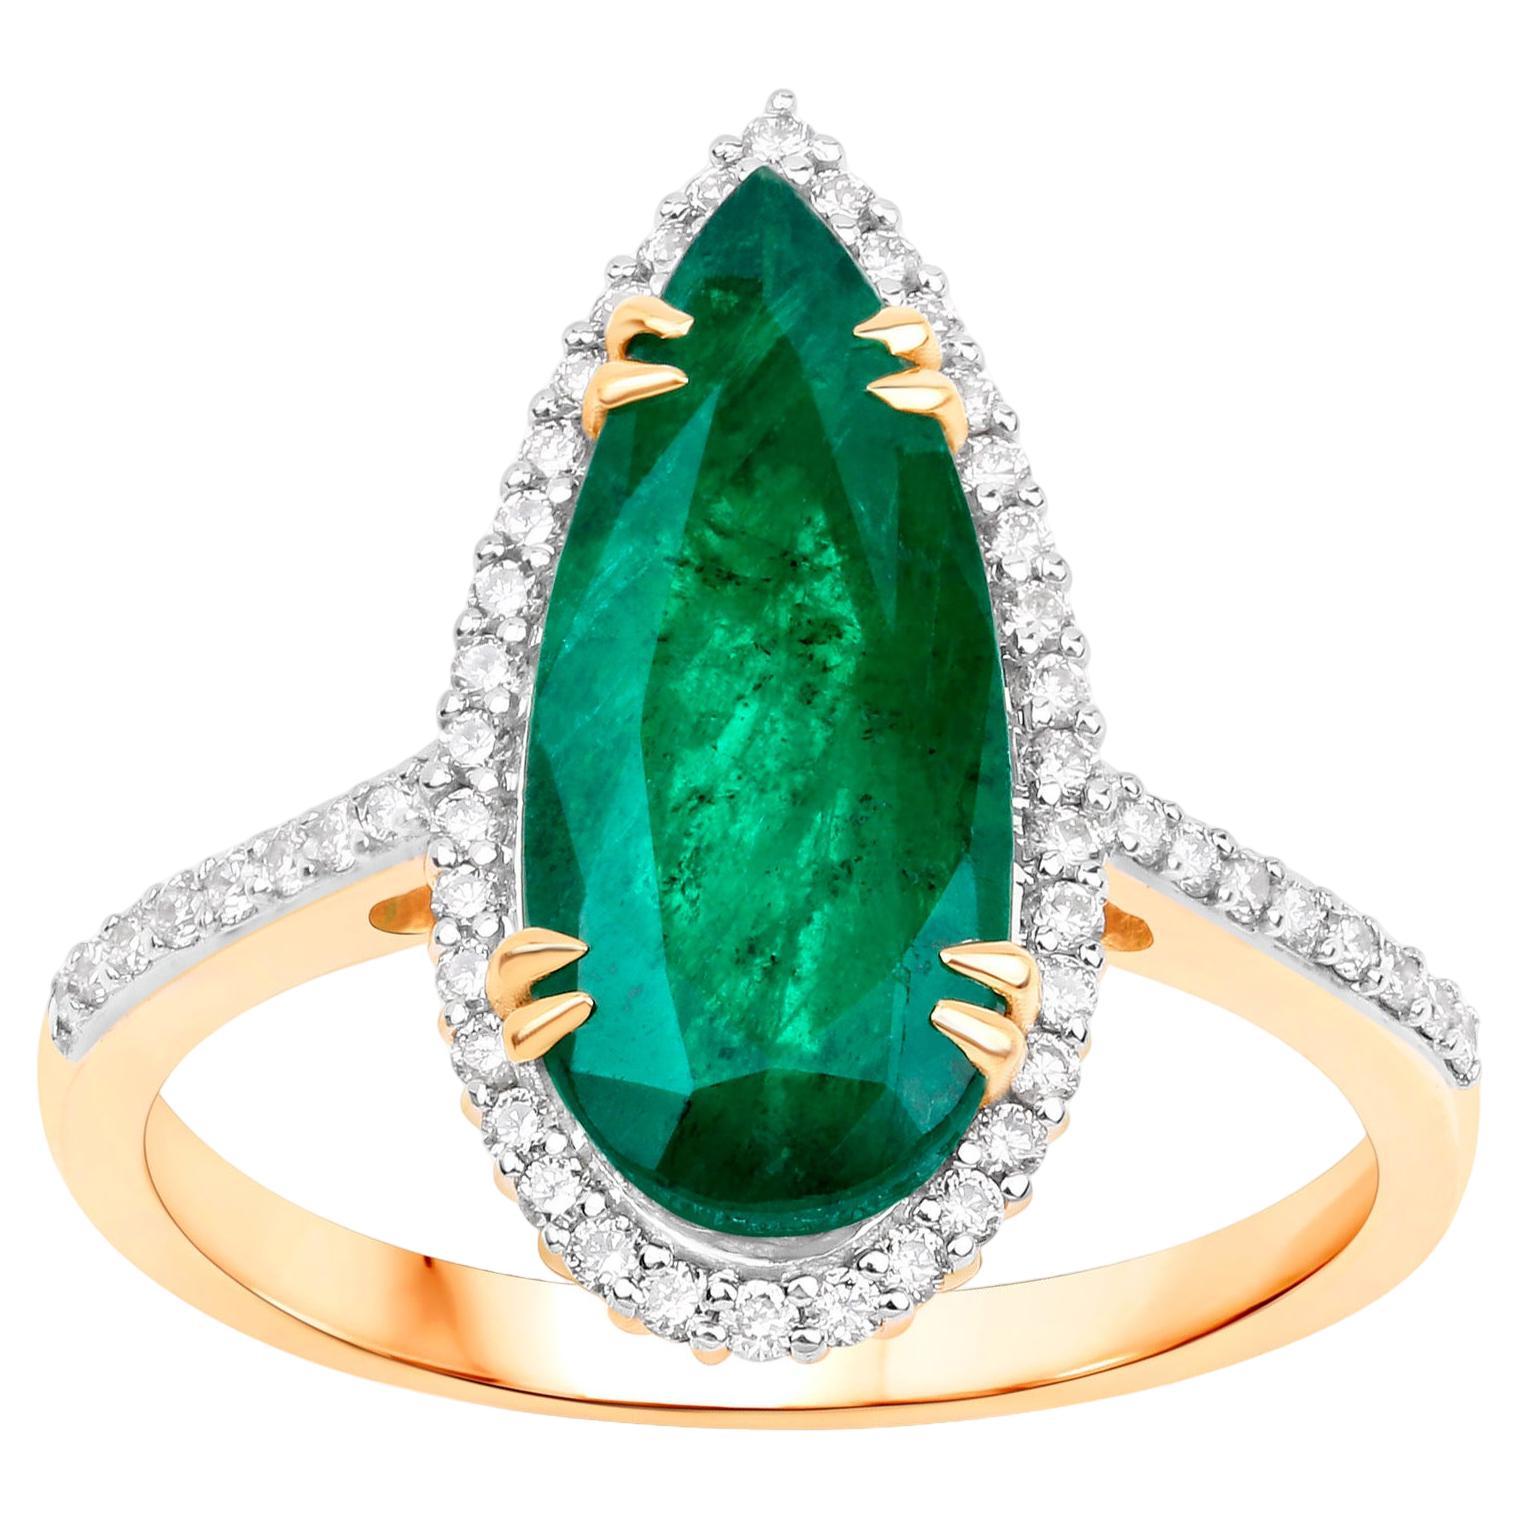 IGI Certified Zambian Emerald Ring With Diamonds 3.39 Carats 14K Yellow Gold For Sale